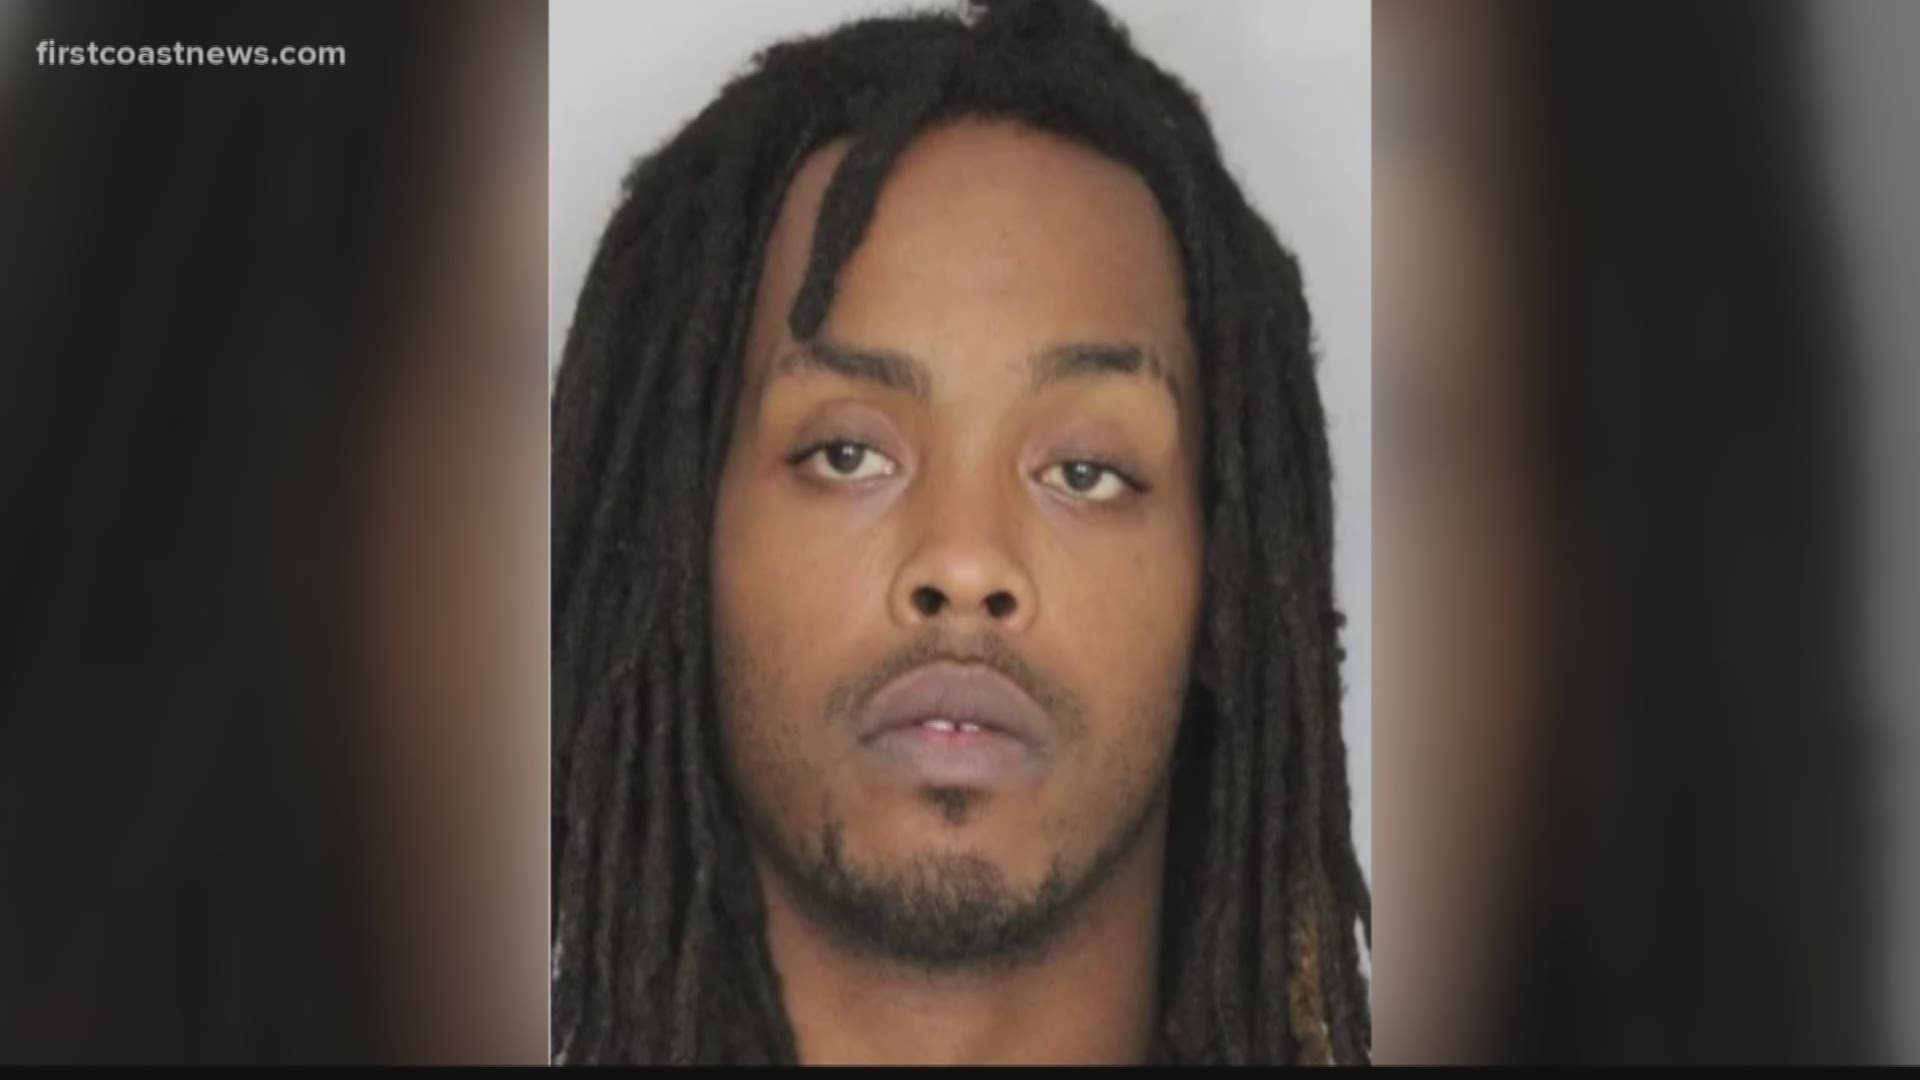 Police say Marcus Heath led them on a high-speed chase in Maryland in a stolen car.